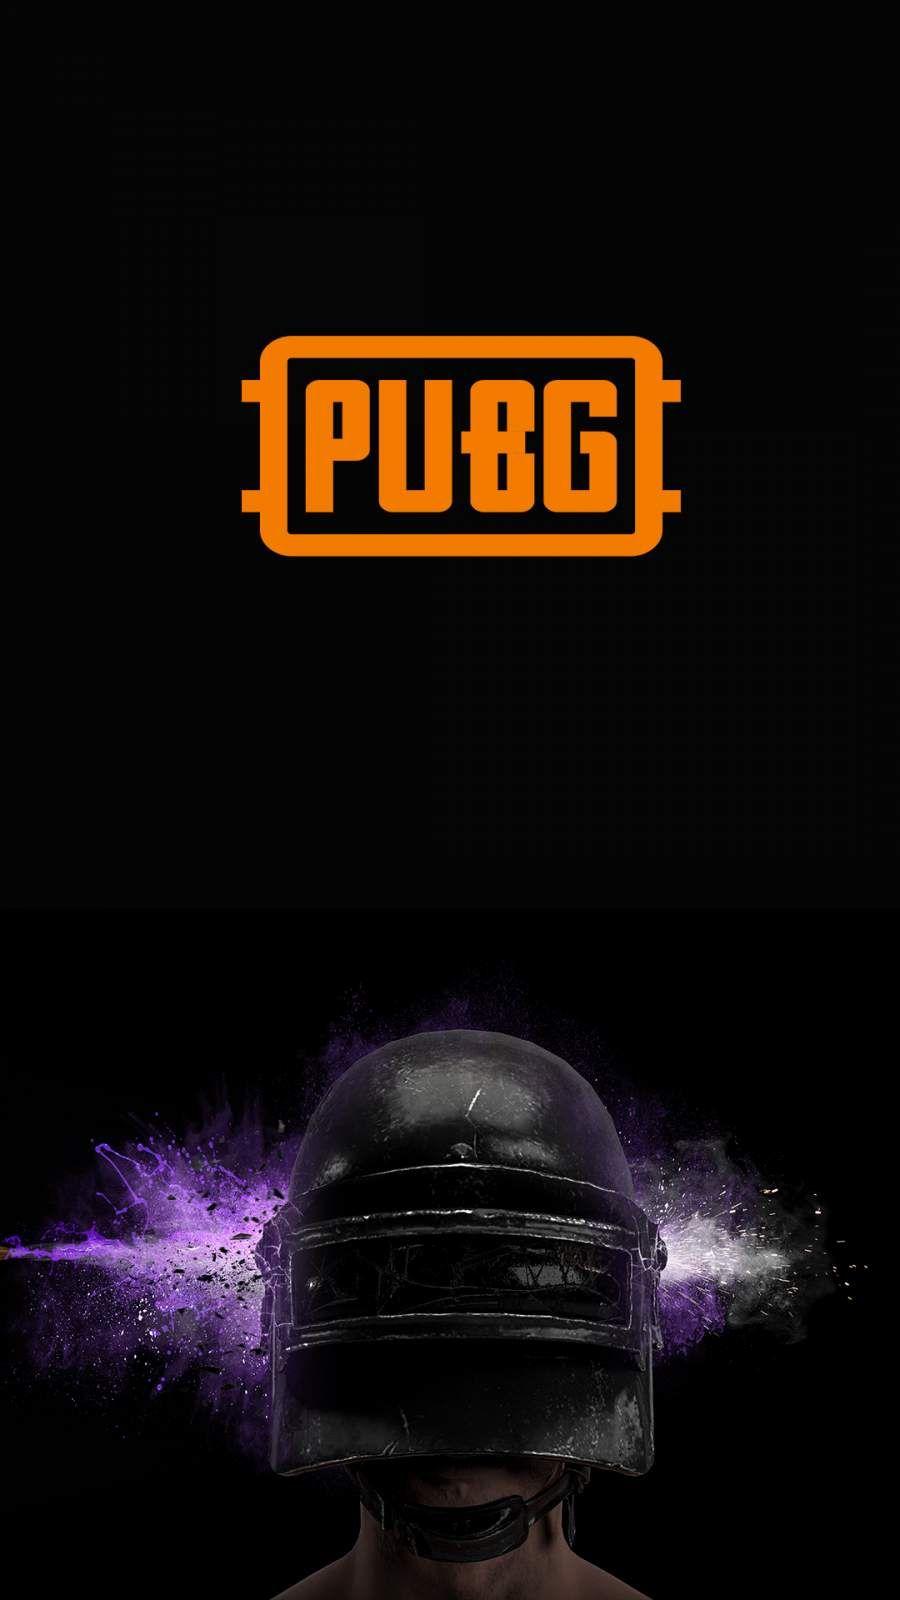 Download PUBG Mobile Wallpaper for your Android, iPhone